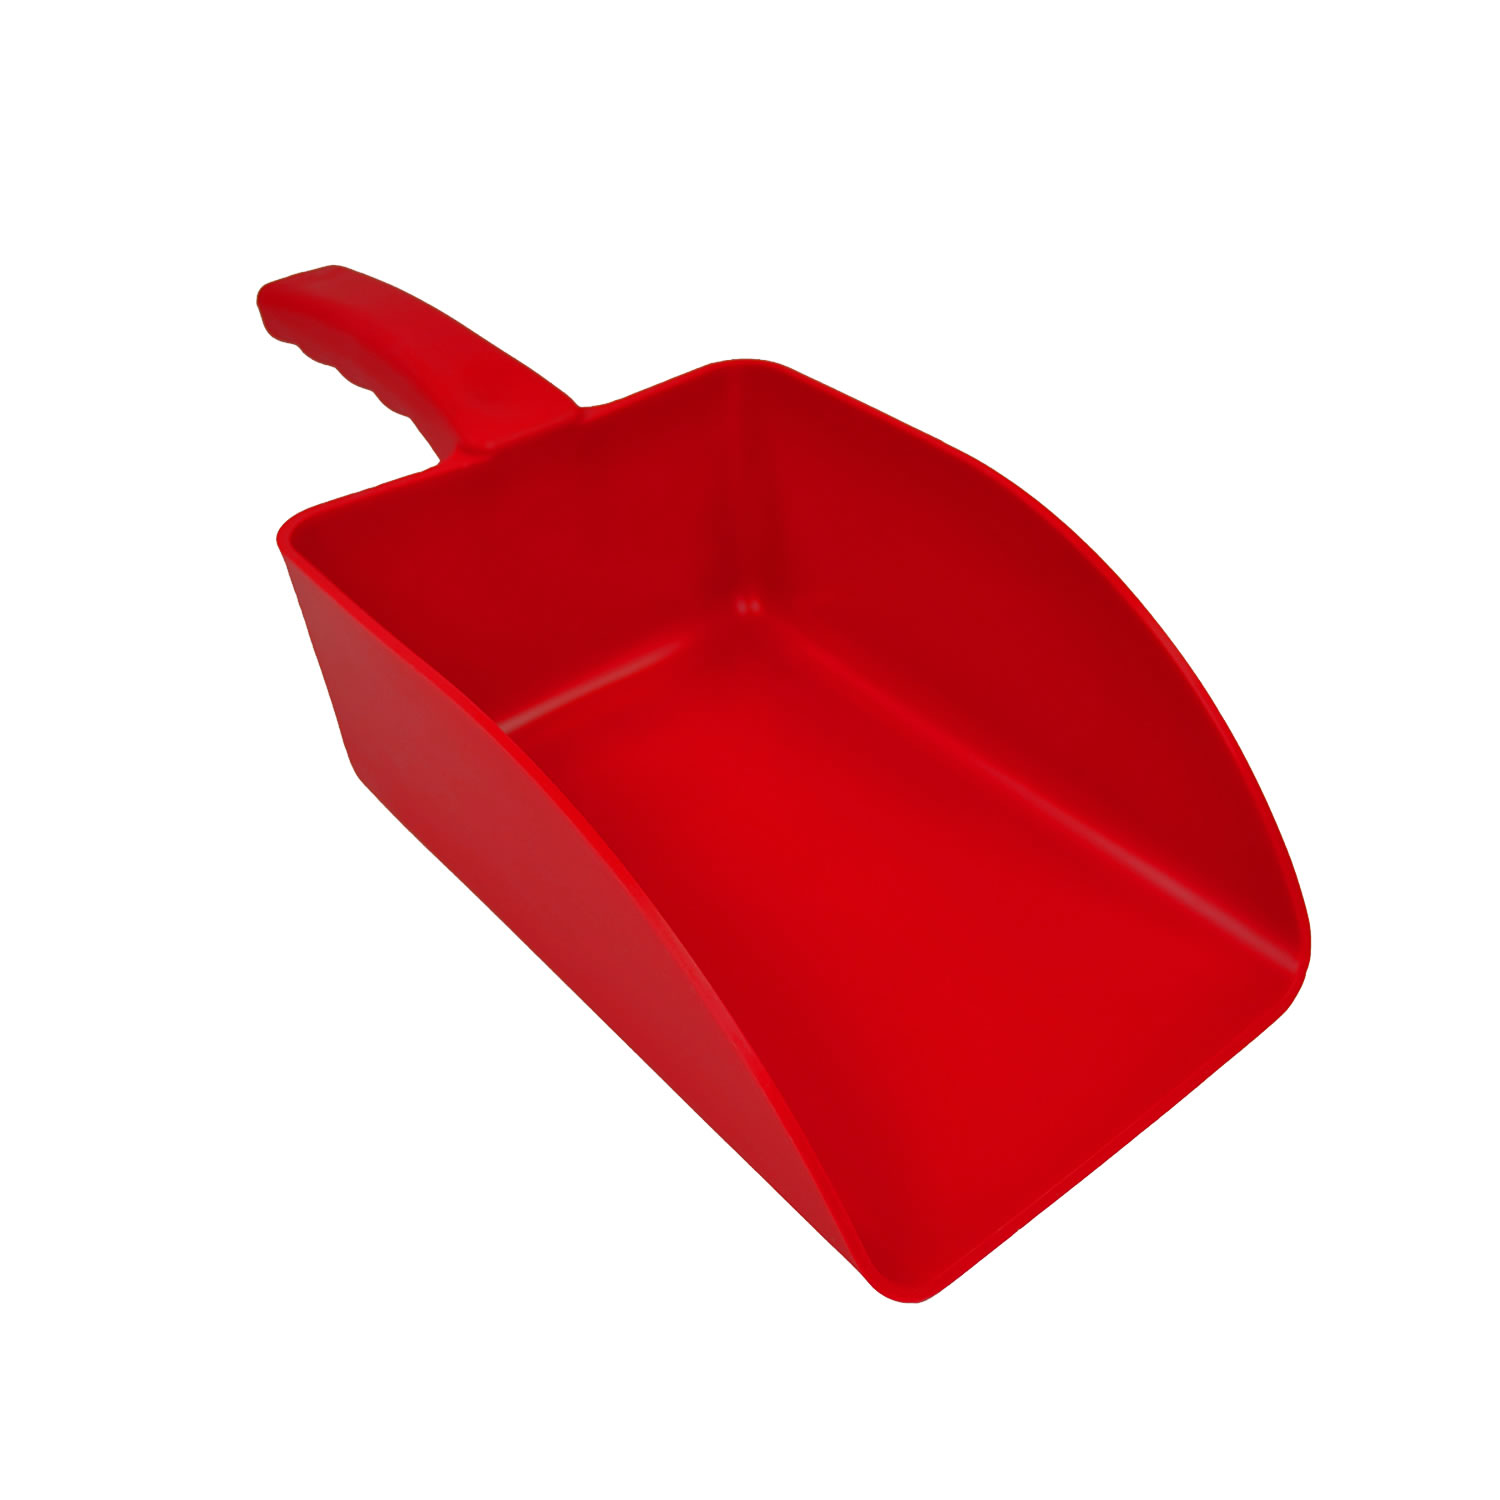 HAROLD MOORE HAND SCOOP SMALL RED SMALL